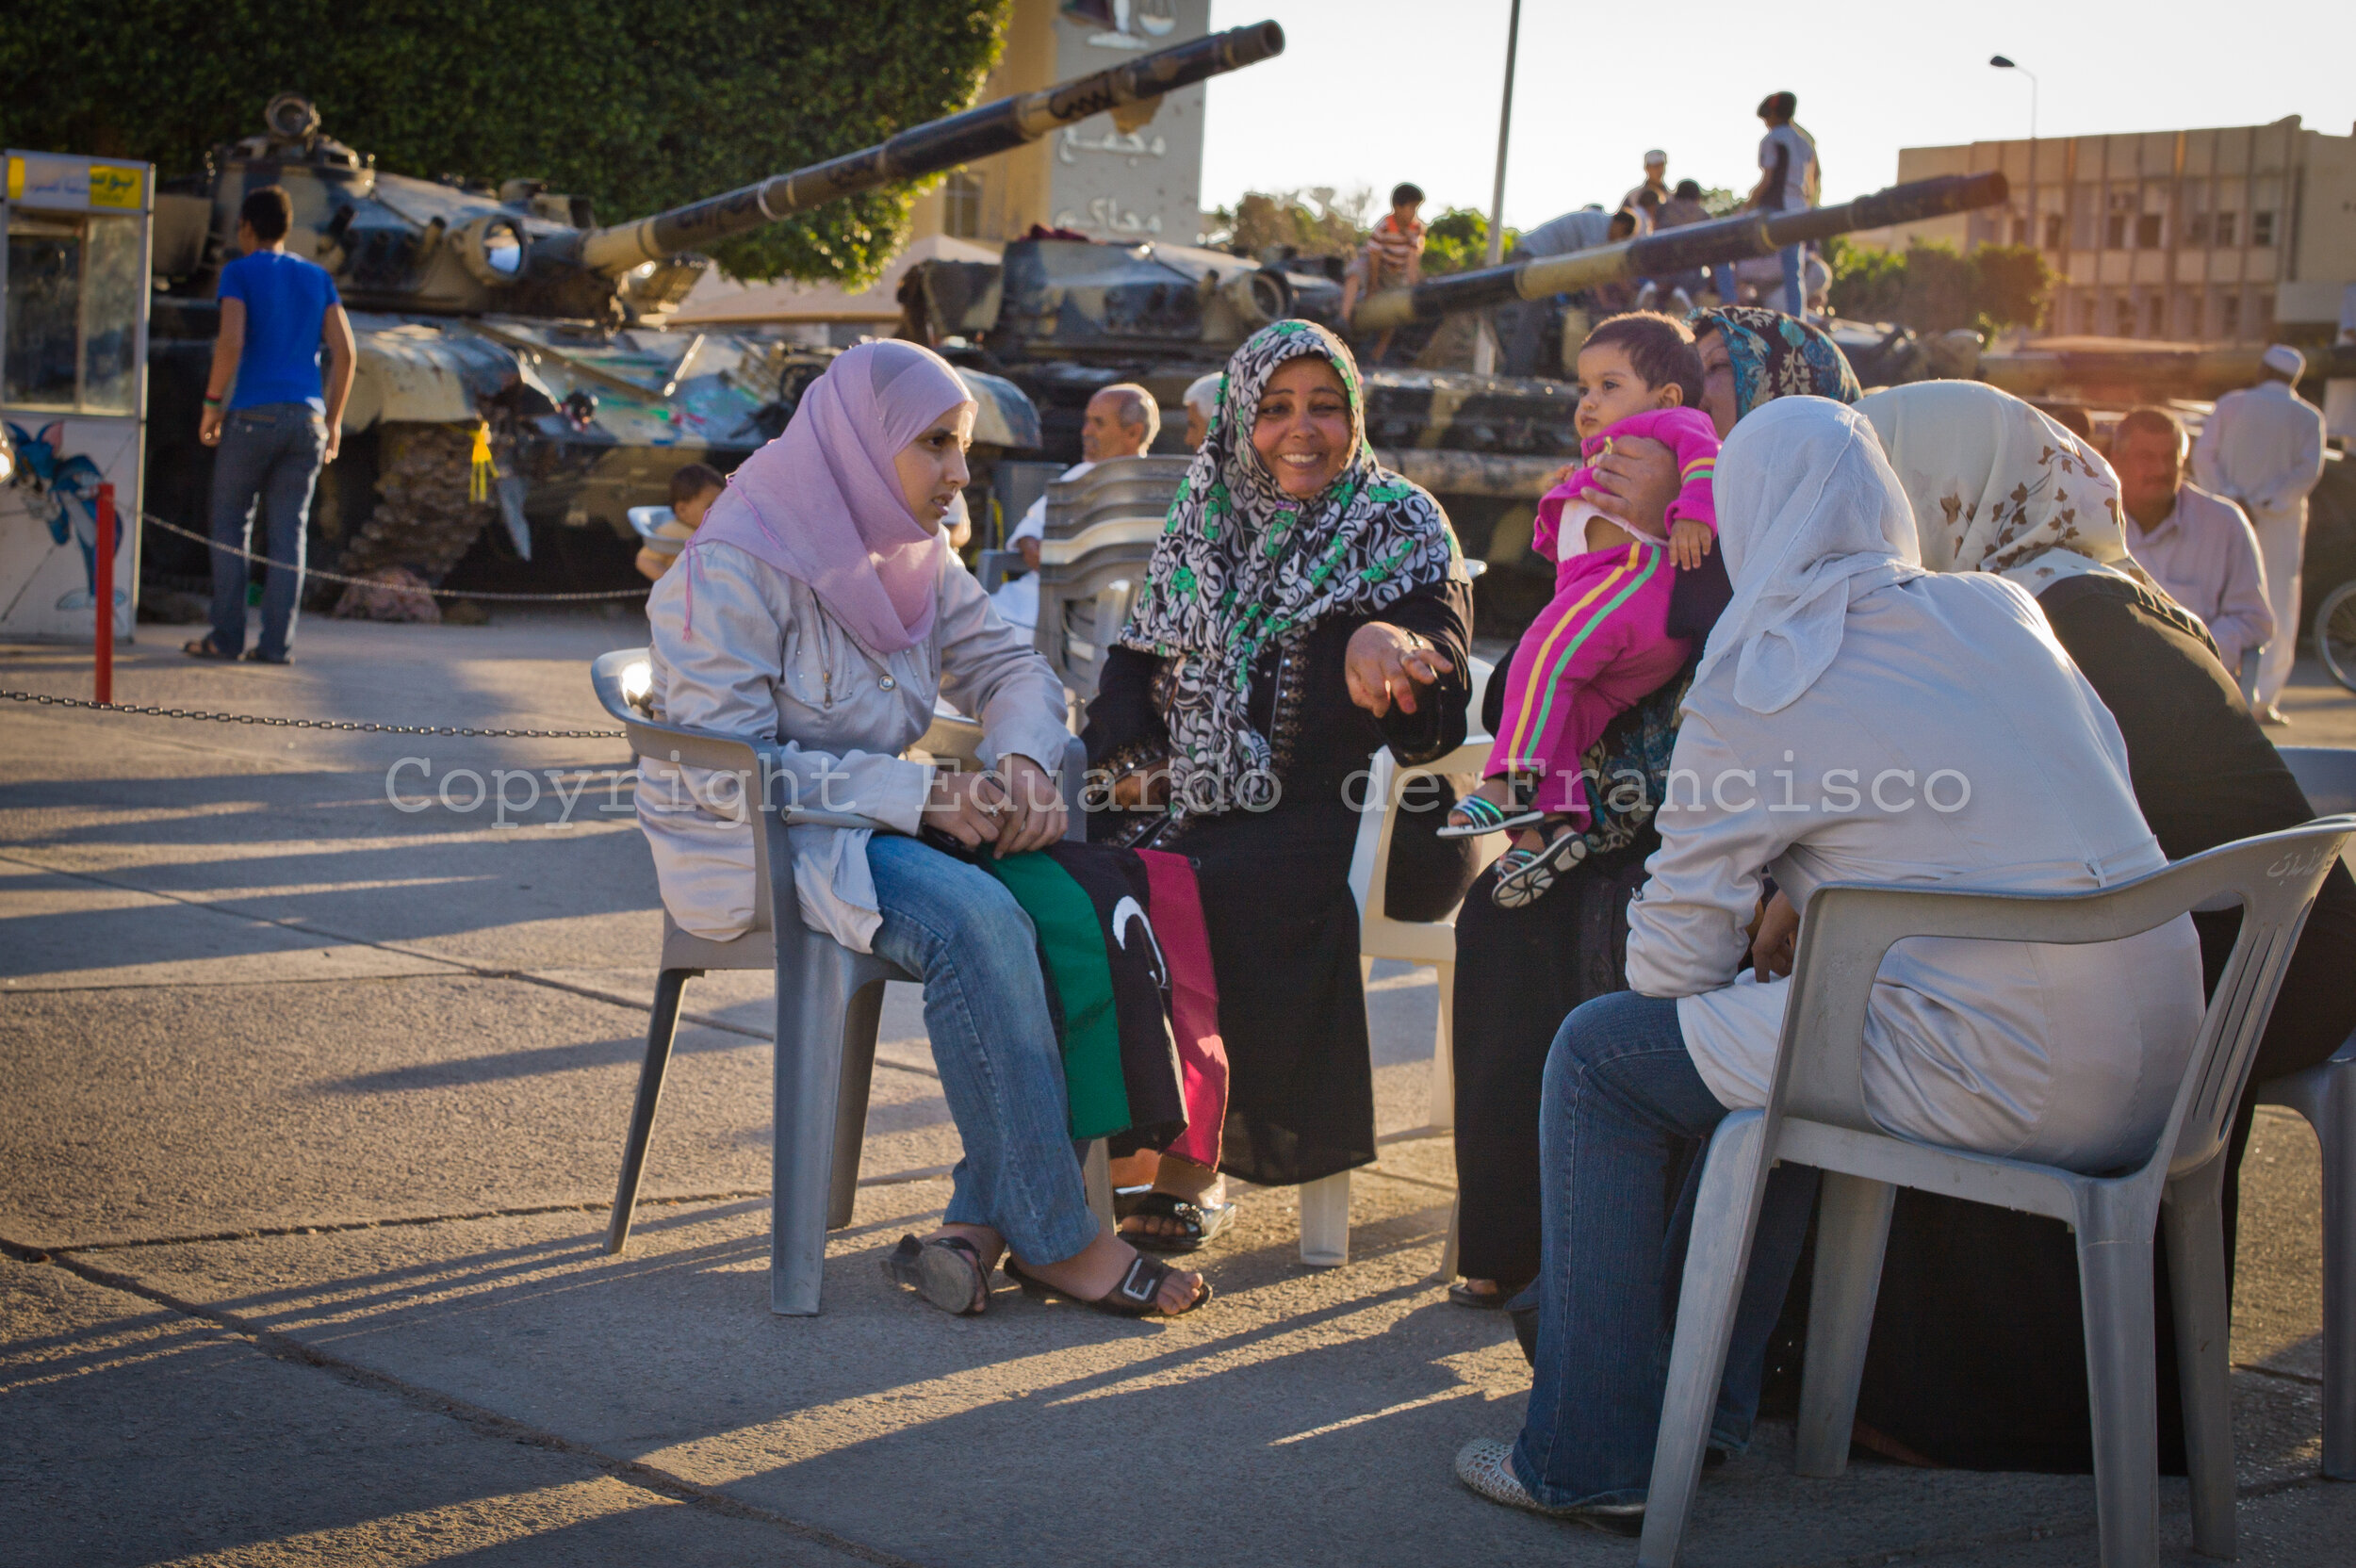  At dusk, a group of women chat in Sahat Al Hout Square 